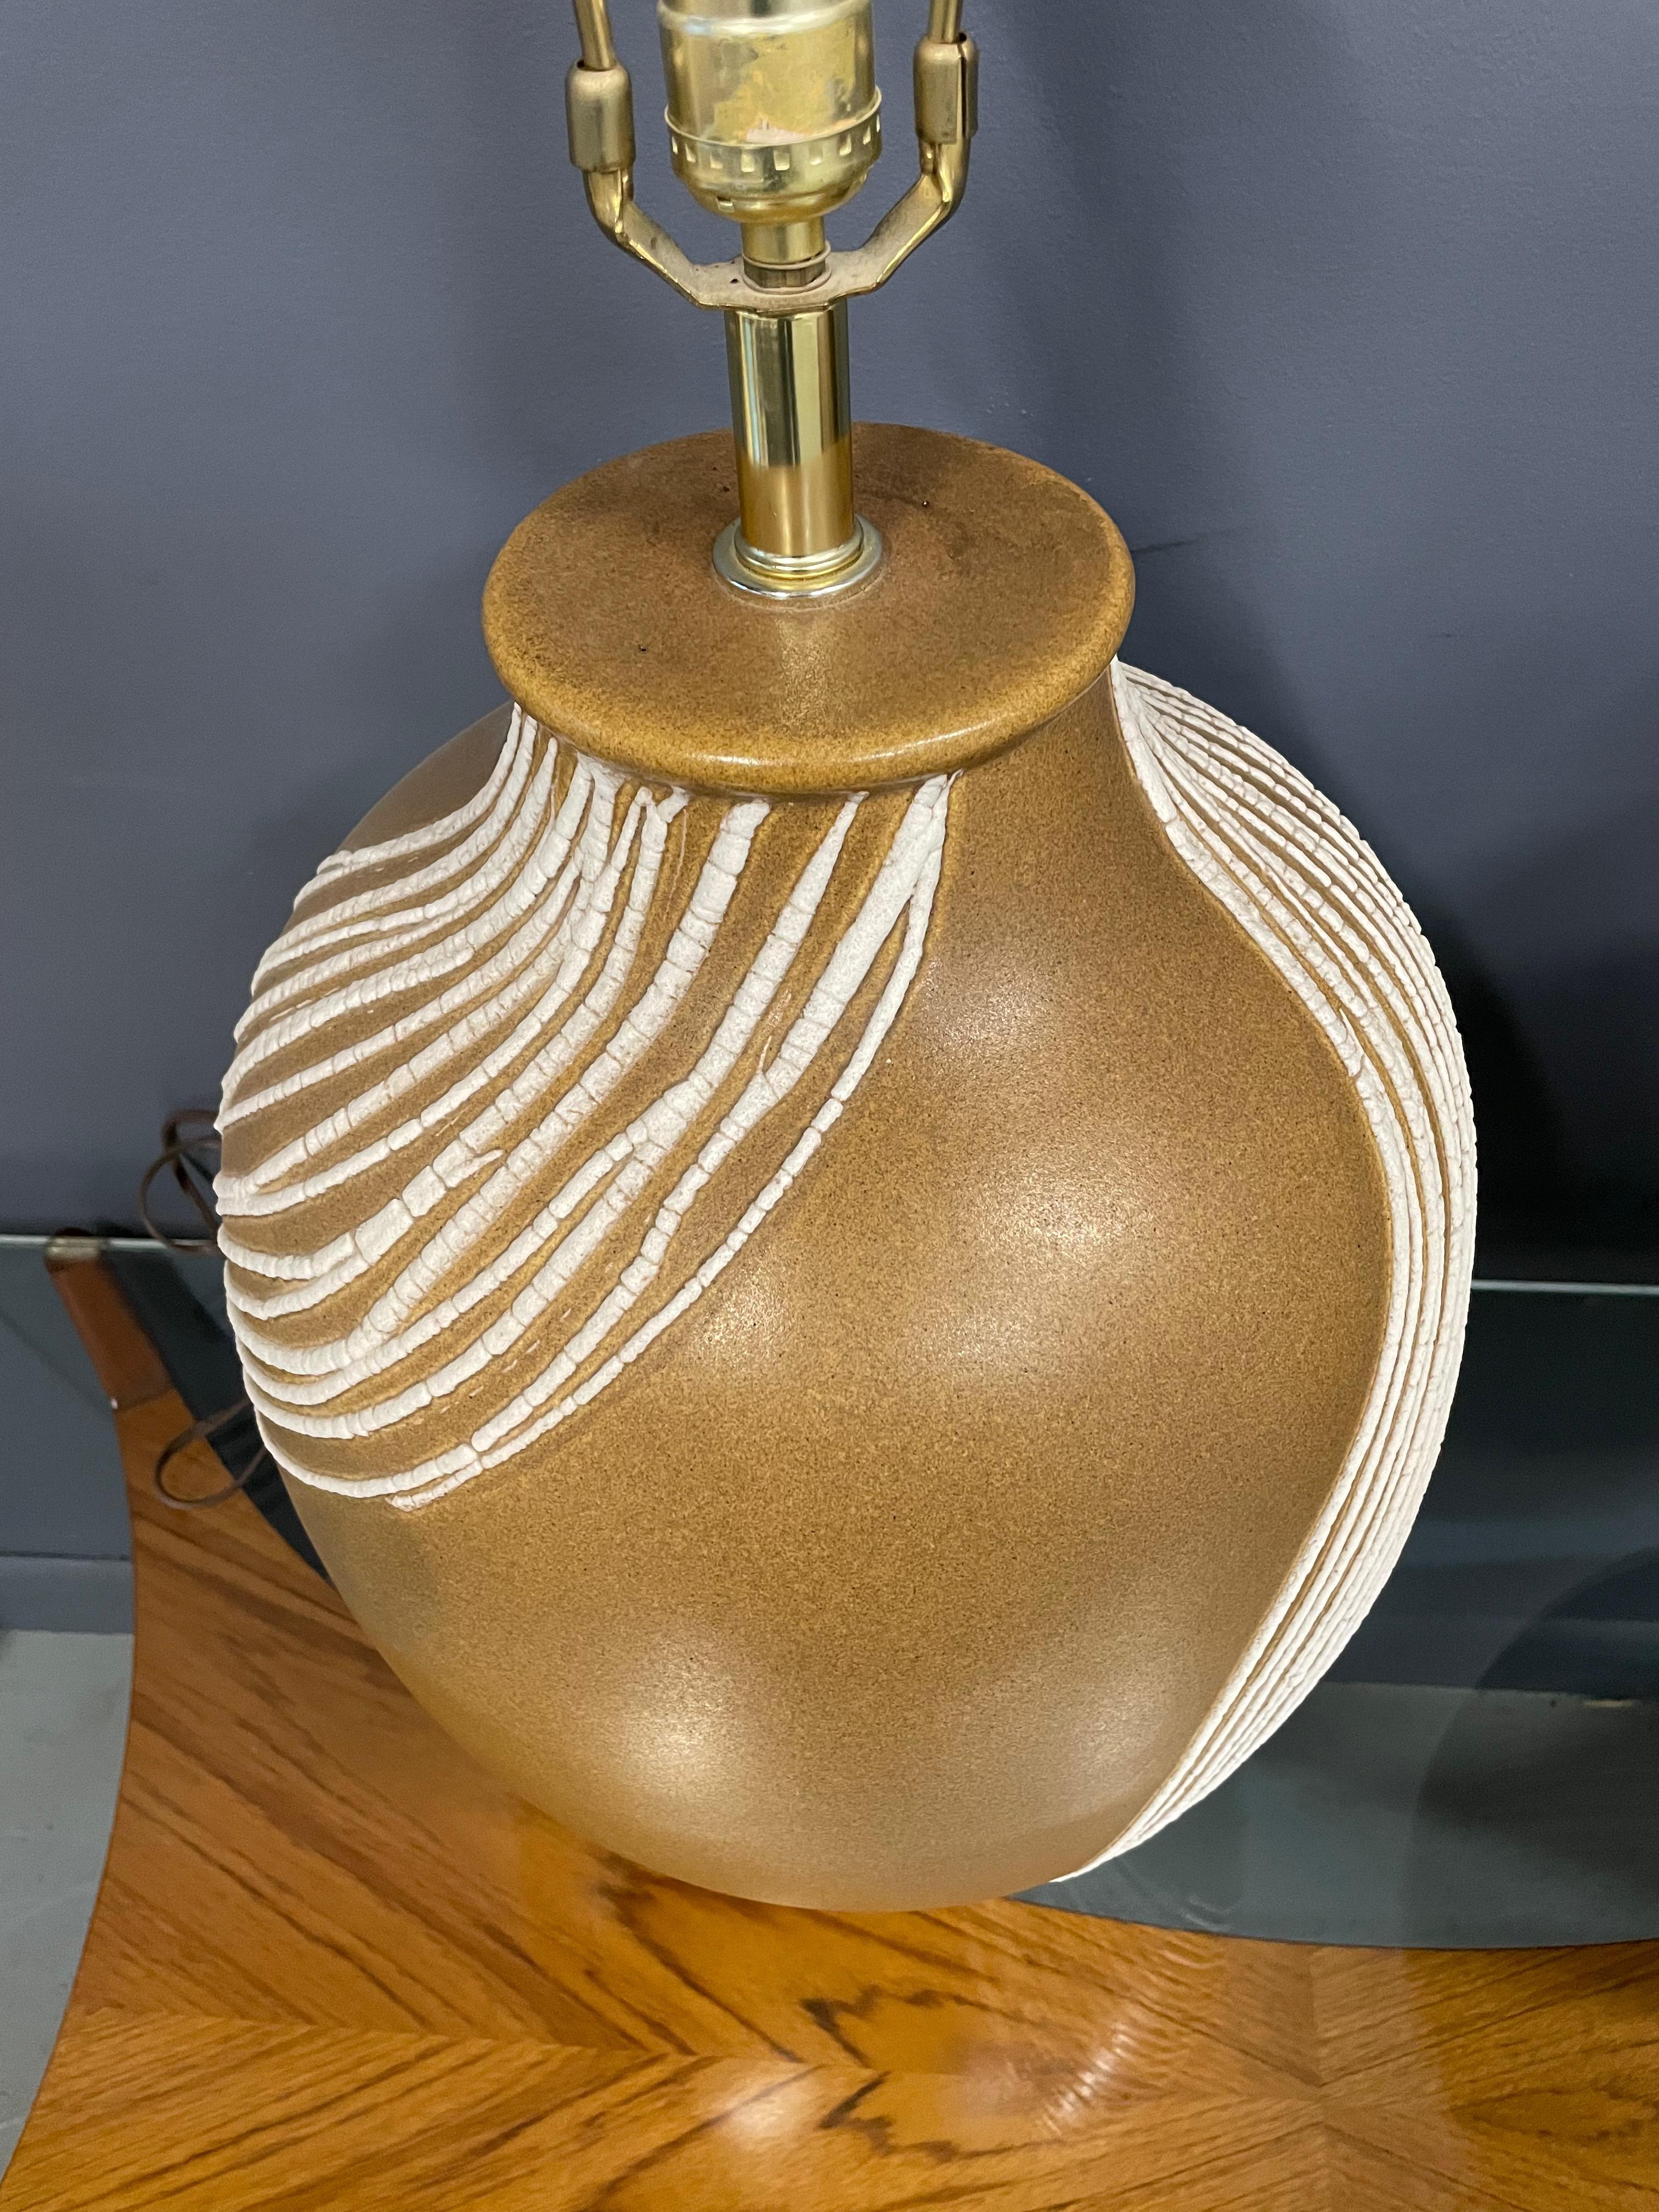 North American Mid Century Pair of Ceramic Caramel Colored Lamps with White Appliquéd Stripes For Sale